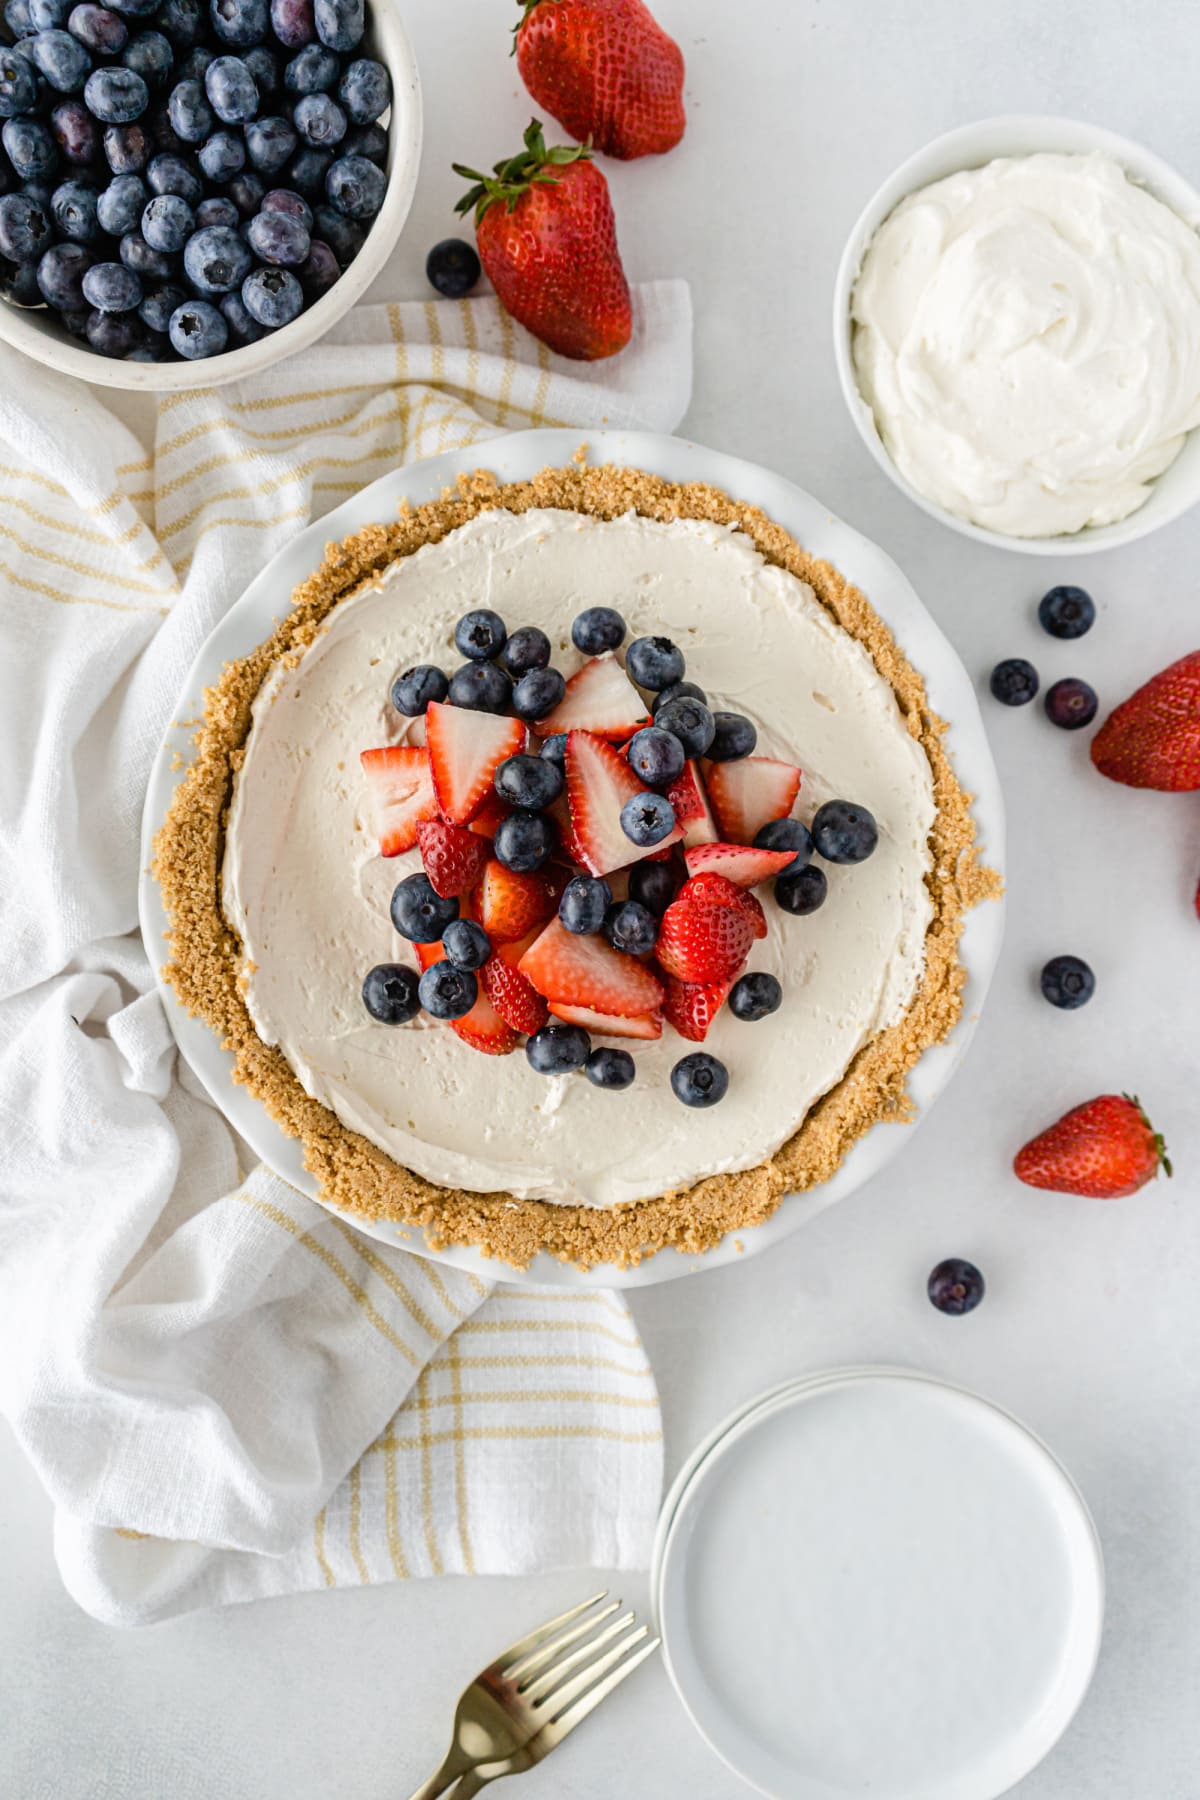 No bake cool whip cheesecake with berries